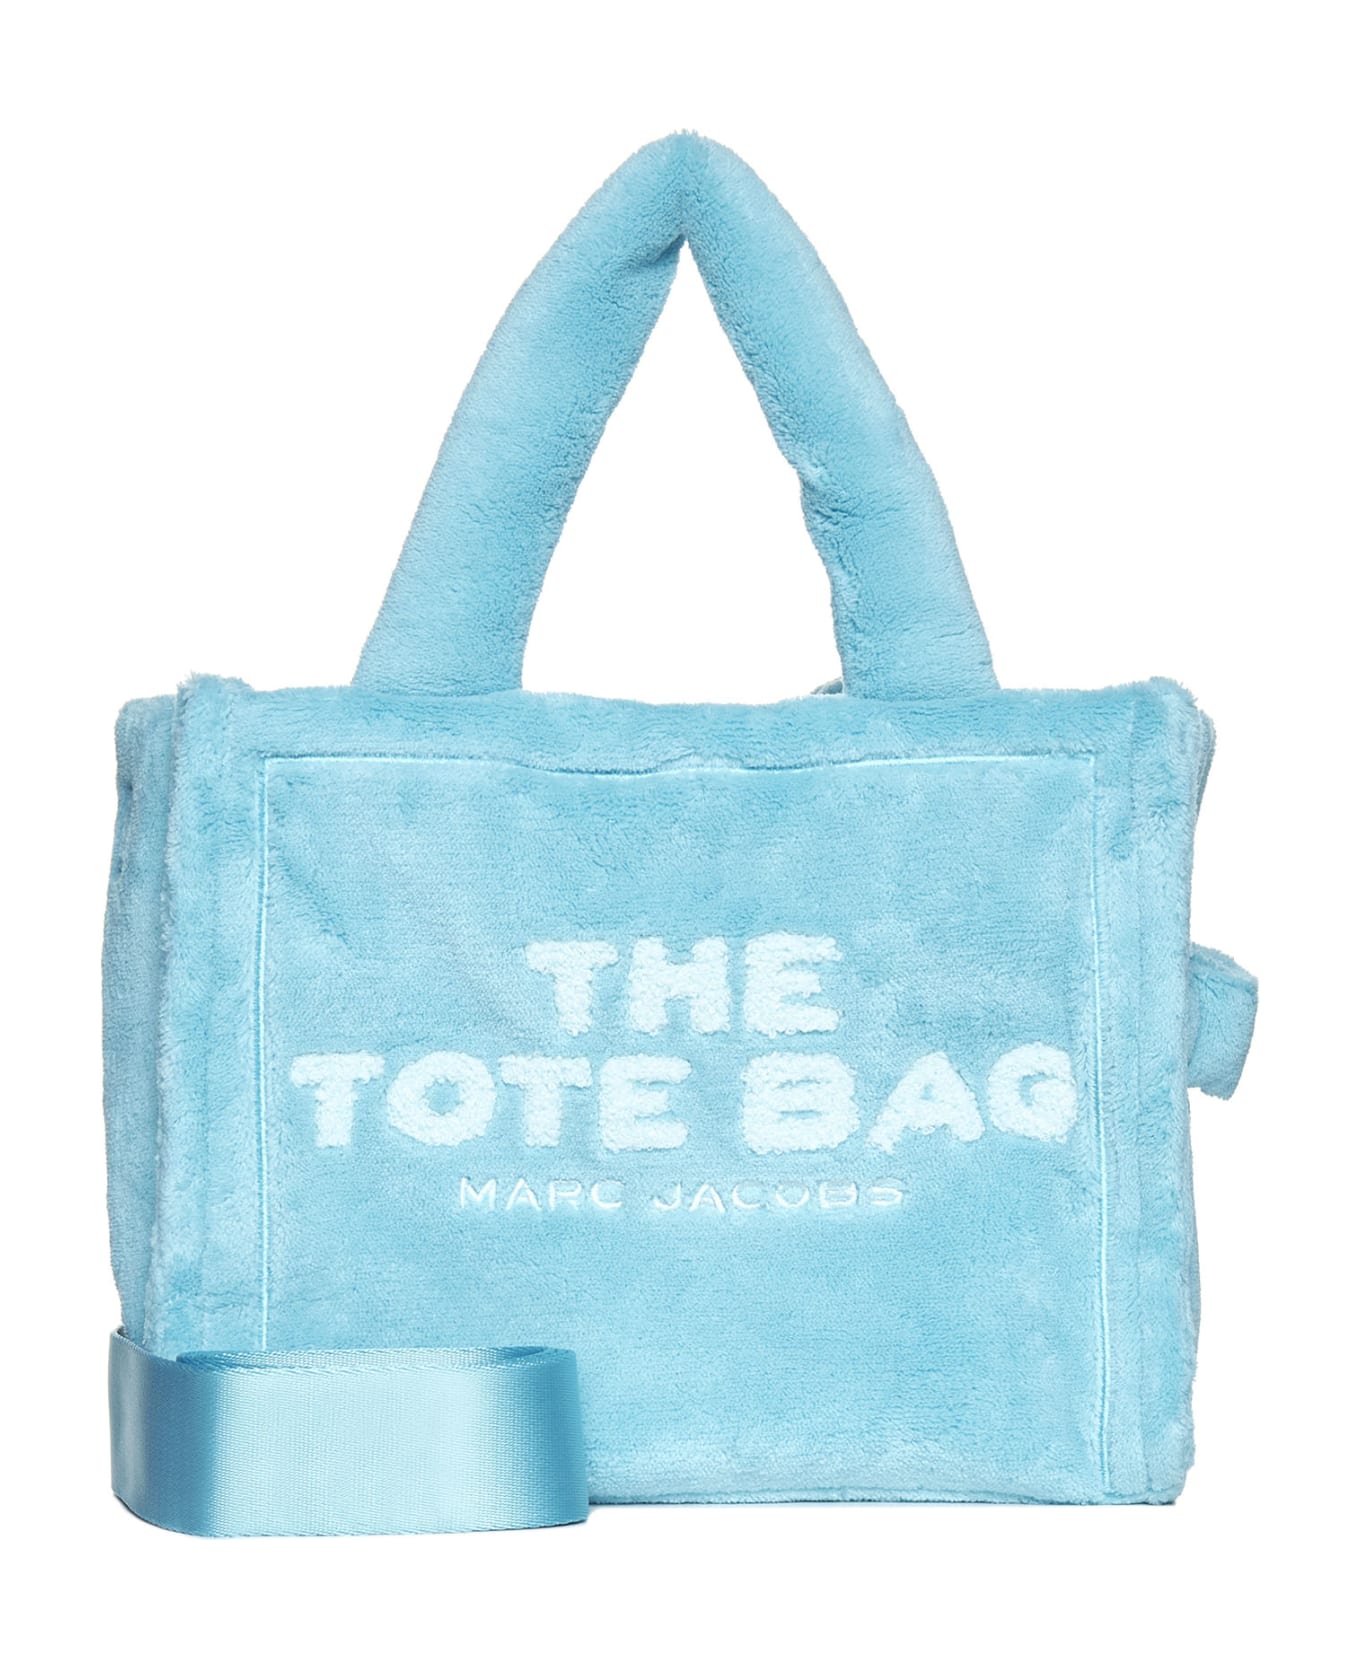 Marc Jacobs Terry Tote Bag - POOL (Light blue)